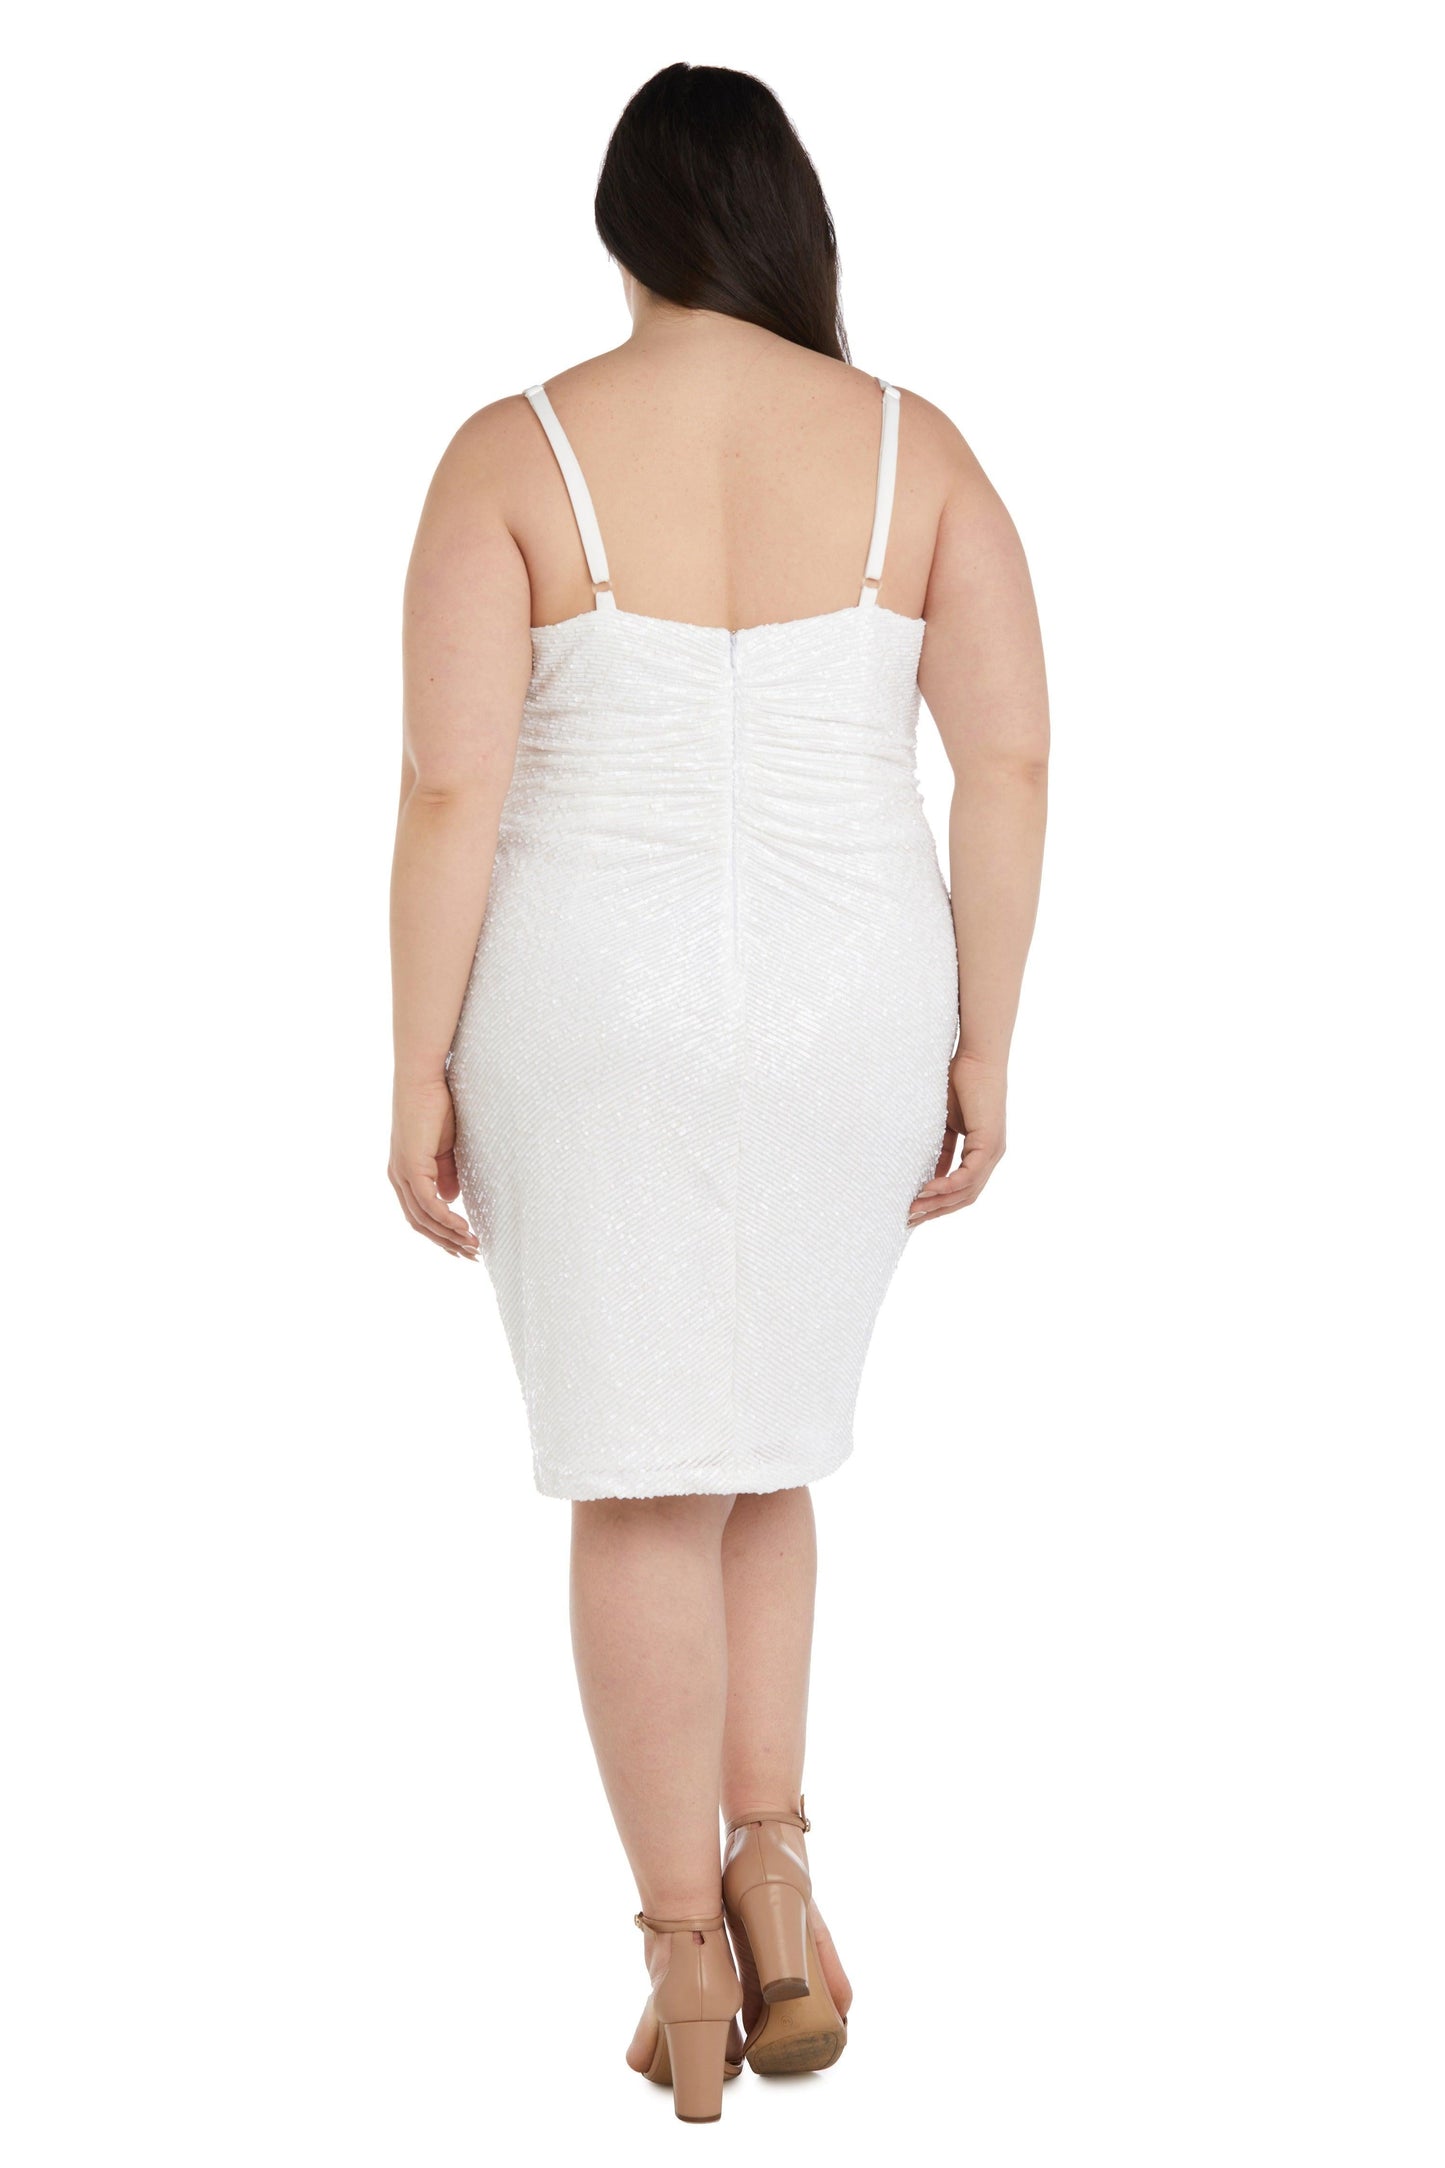 Nightway Plus Size Short Cocktail Dress 22104W - The Dress Outlet